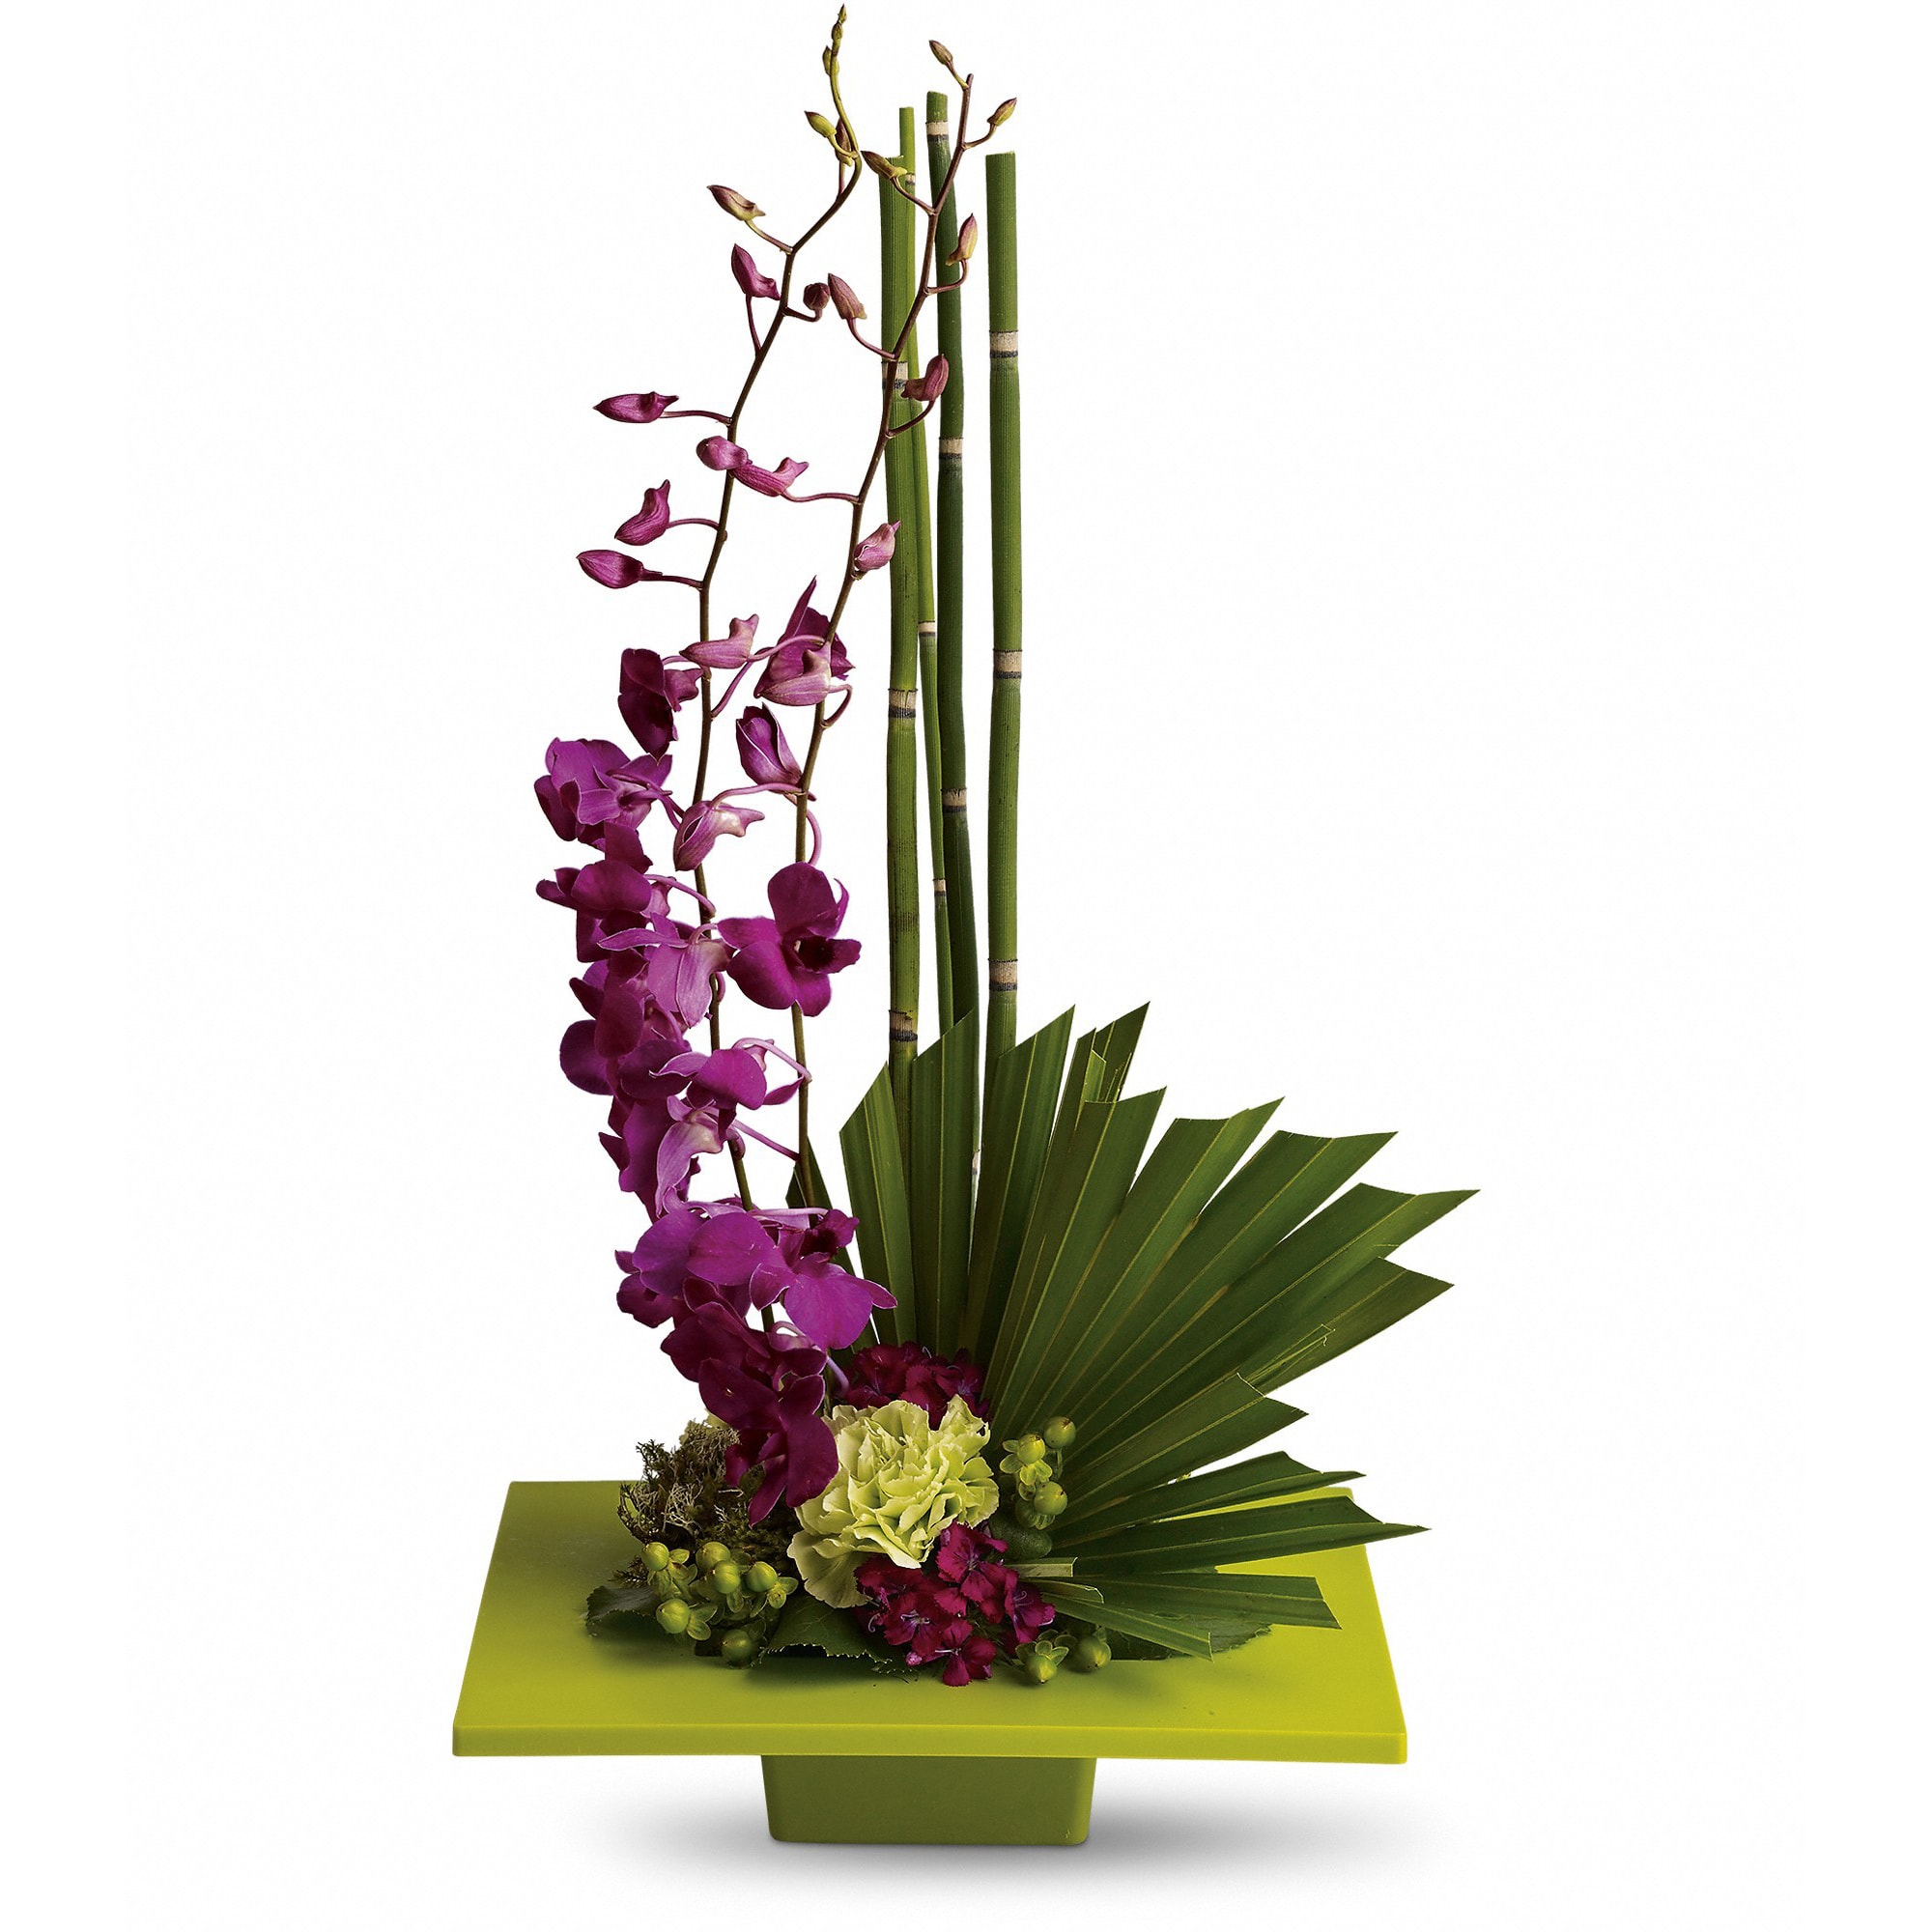 Zen Artistry - Purple dendrobium orchids, green carnations, dark pink Sweet William, an emerald palm leaf and other tropical greens are arranged in a square black container. Perfect when you've got a yen to send Zen! Approximately 12 1/4&quot; W x 23&quot; H. T81-1A  Regular contains 3 stems of orchids, Deluxe contains 4, Premium contains 5.